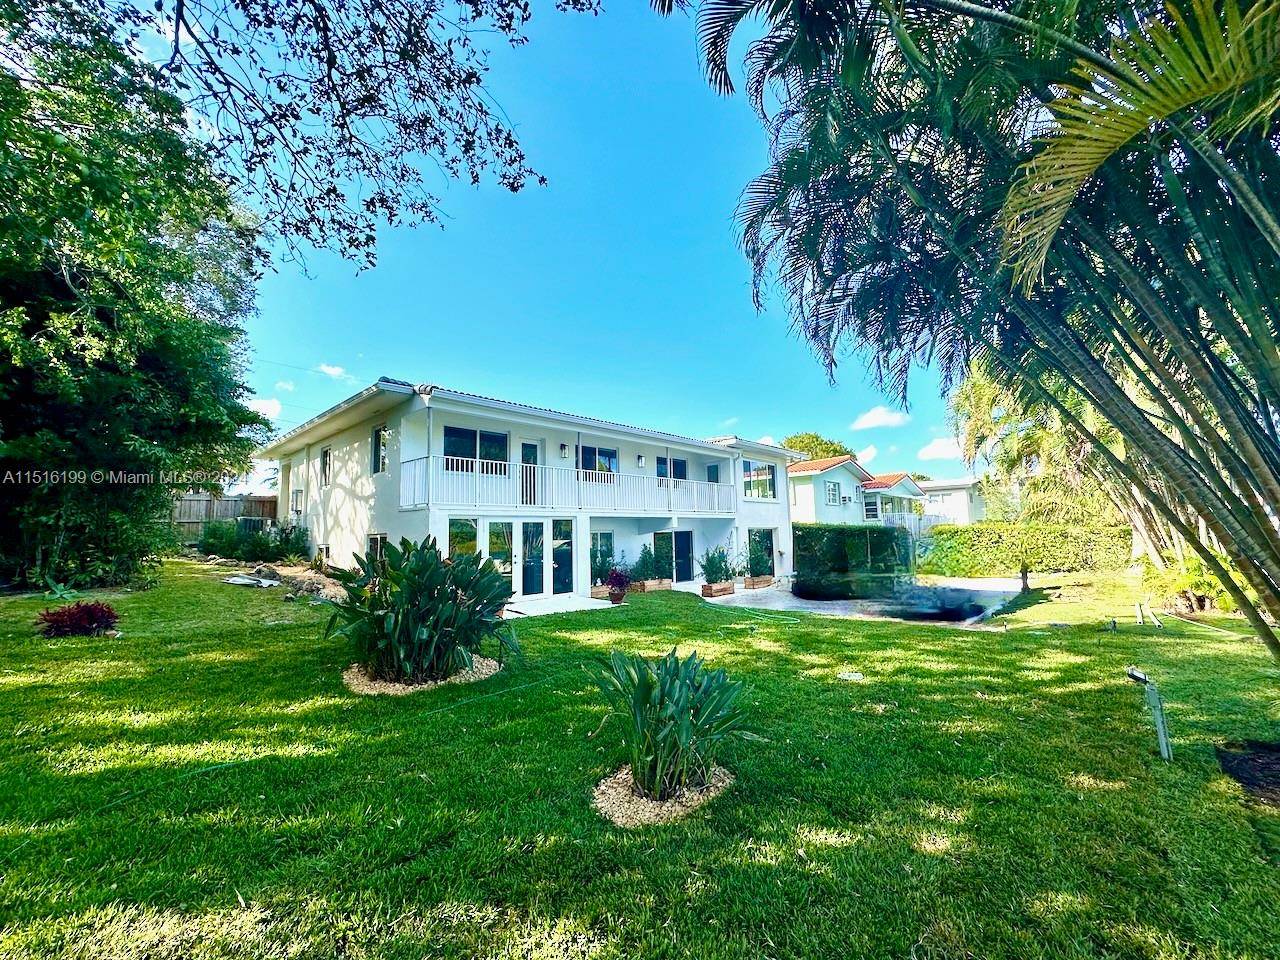 Miami Shores Lake WATERFRONT 4 bed 2 1 baths lake house with 3 bedroom 2 bath on 2nd floor and very large Florida room 1 2 bath the first floor ...